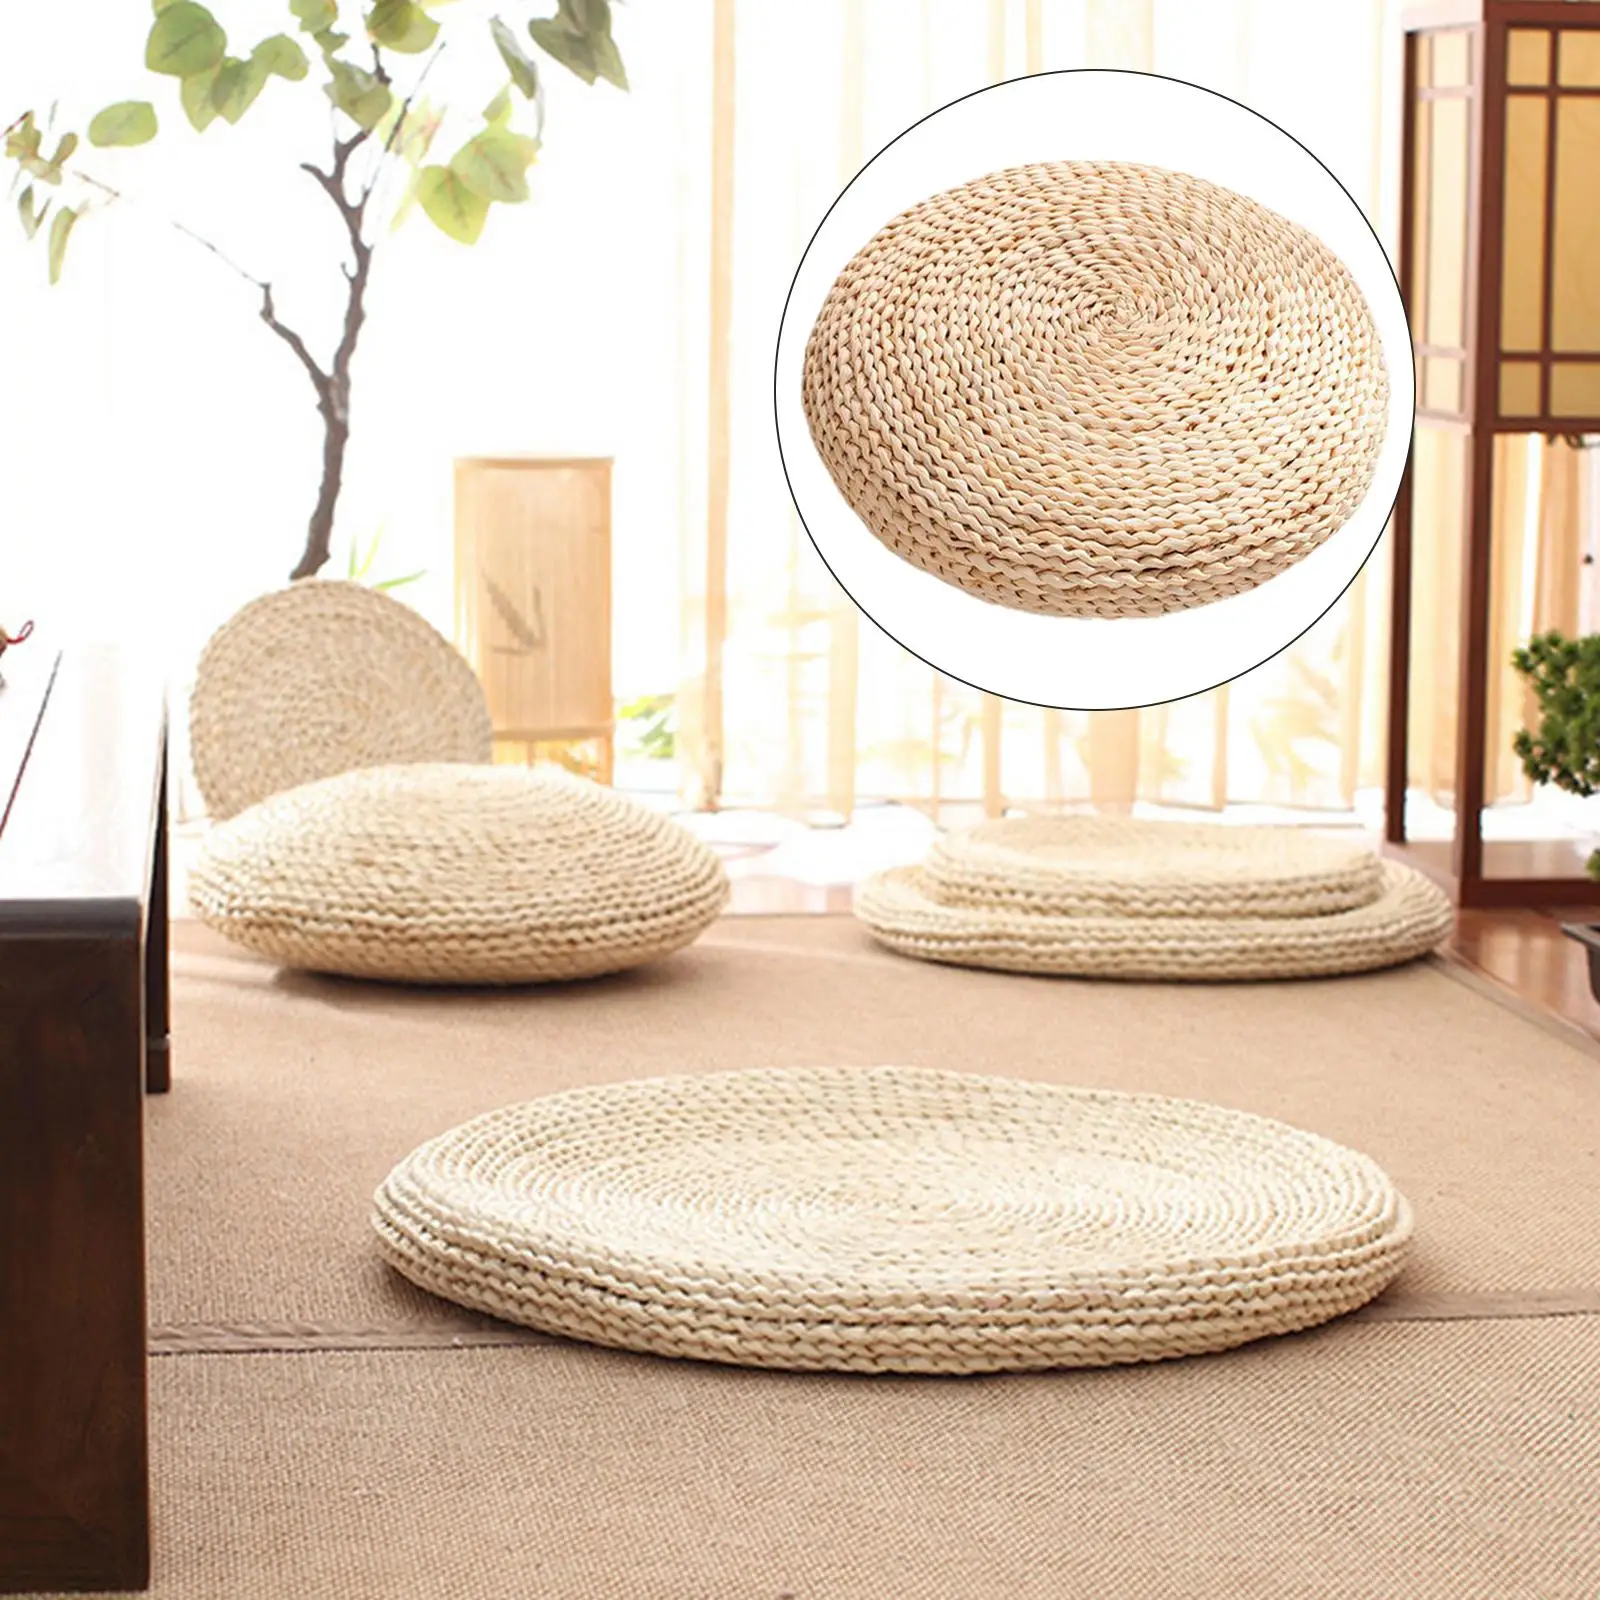 Round Floor Cushions Pillow Straw Pouf Tufted Corduroy Tatami Soft Thick Floor Seat Pillows for Rocking Pad